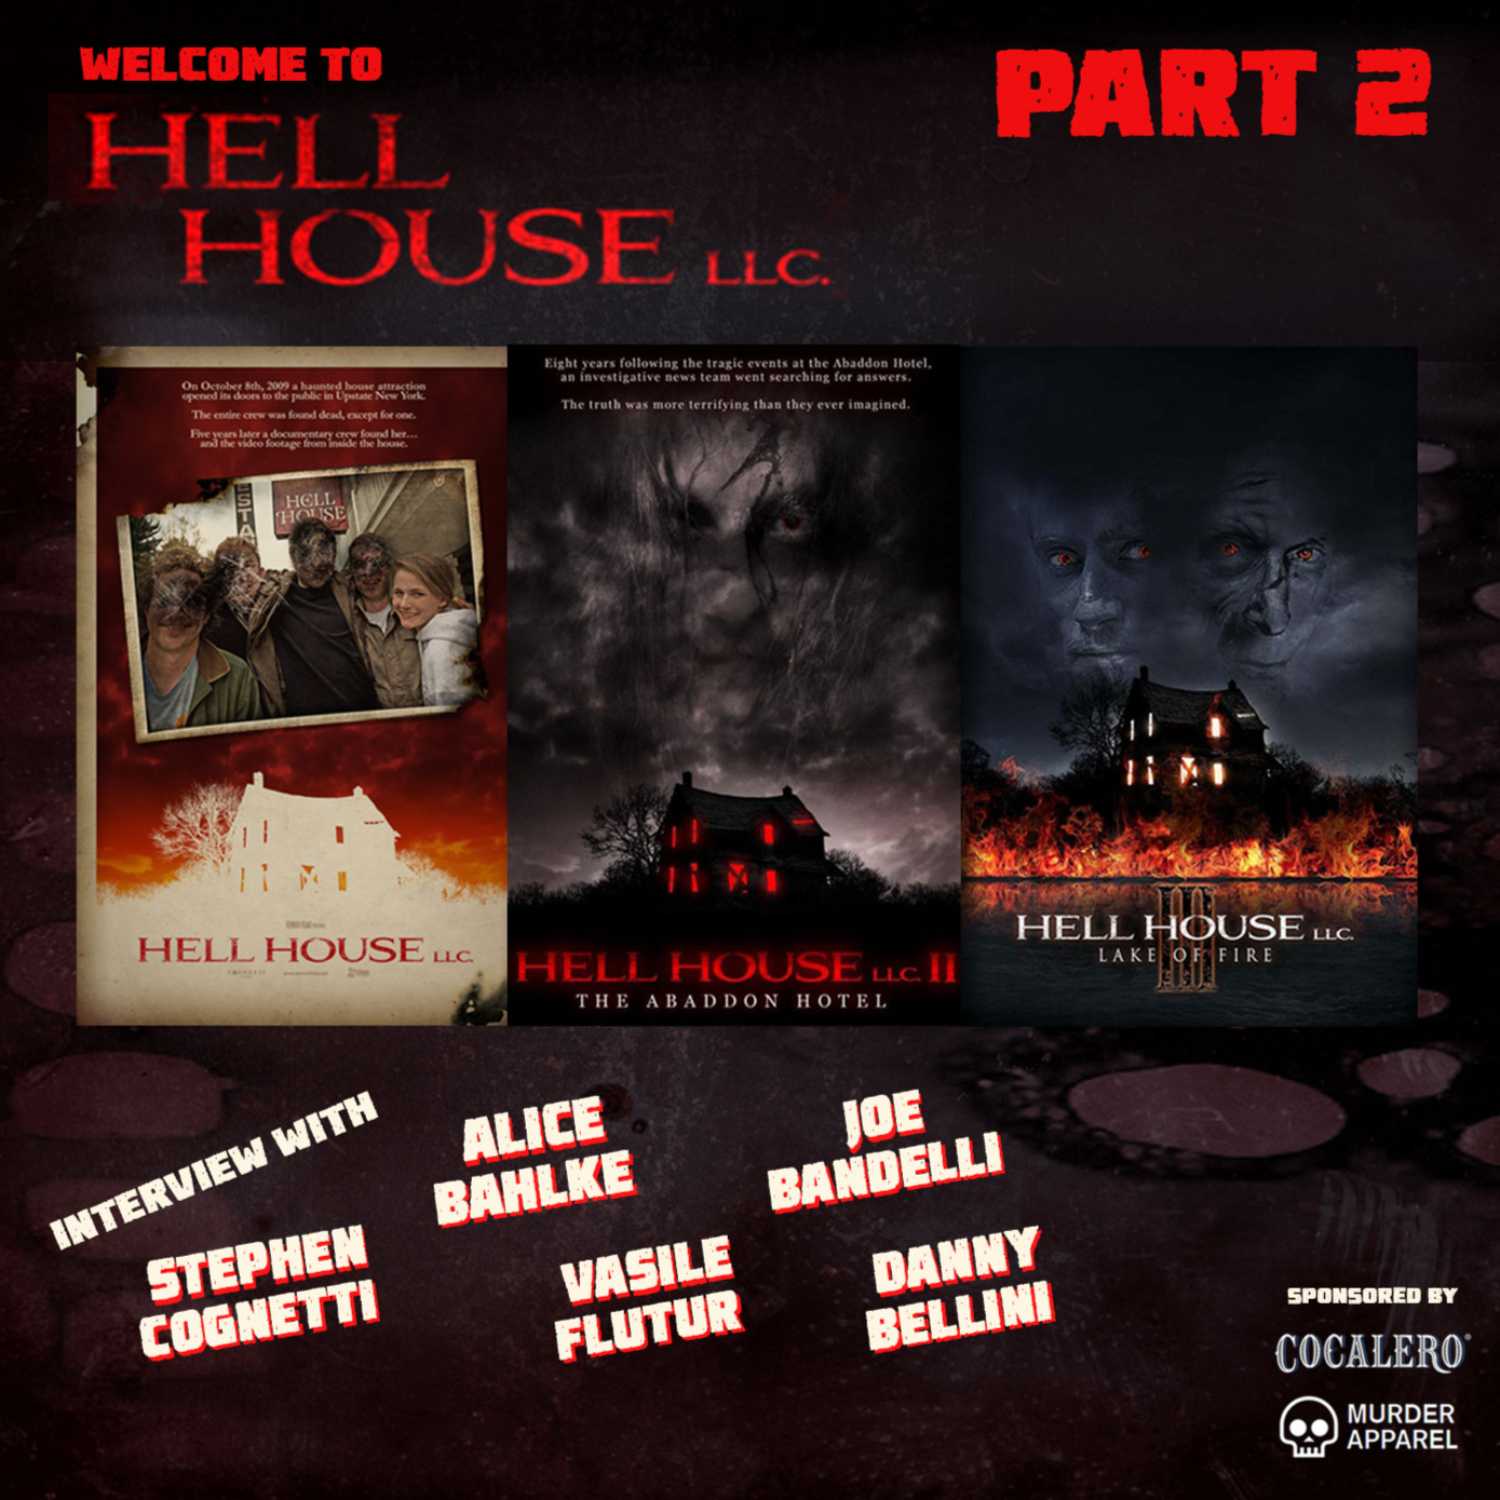 Welcome to Hell House, LLC! - Part Two Image